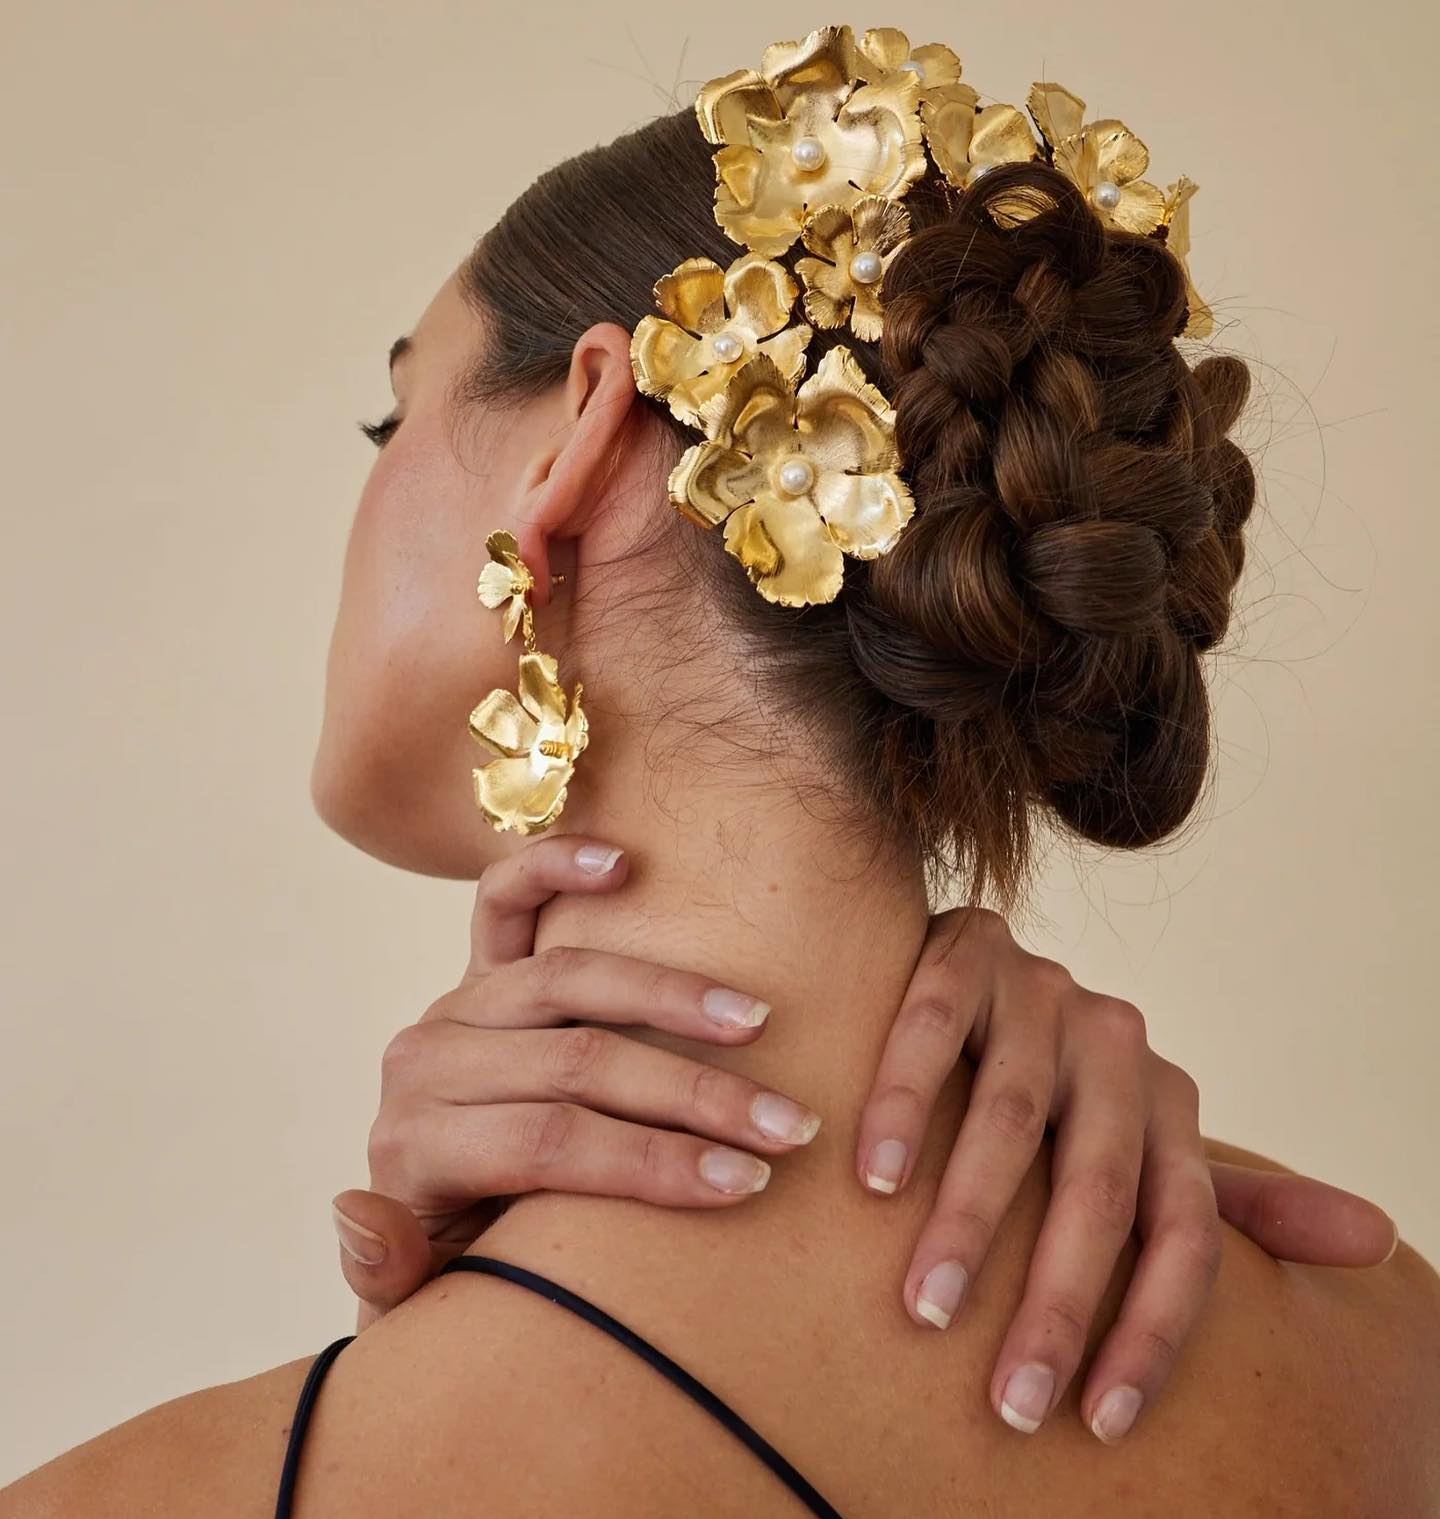 Woman with gold hair accessories